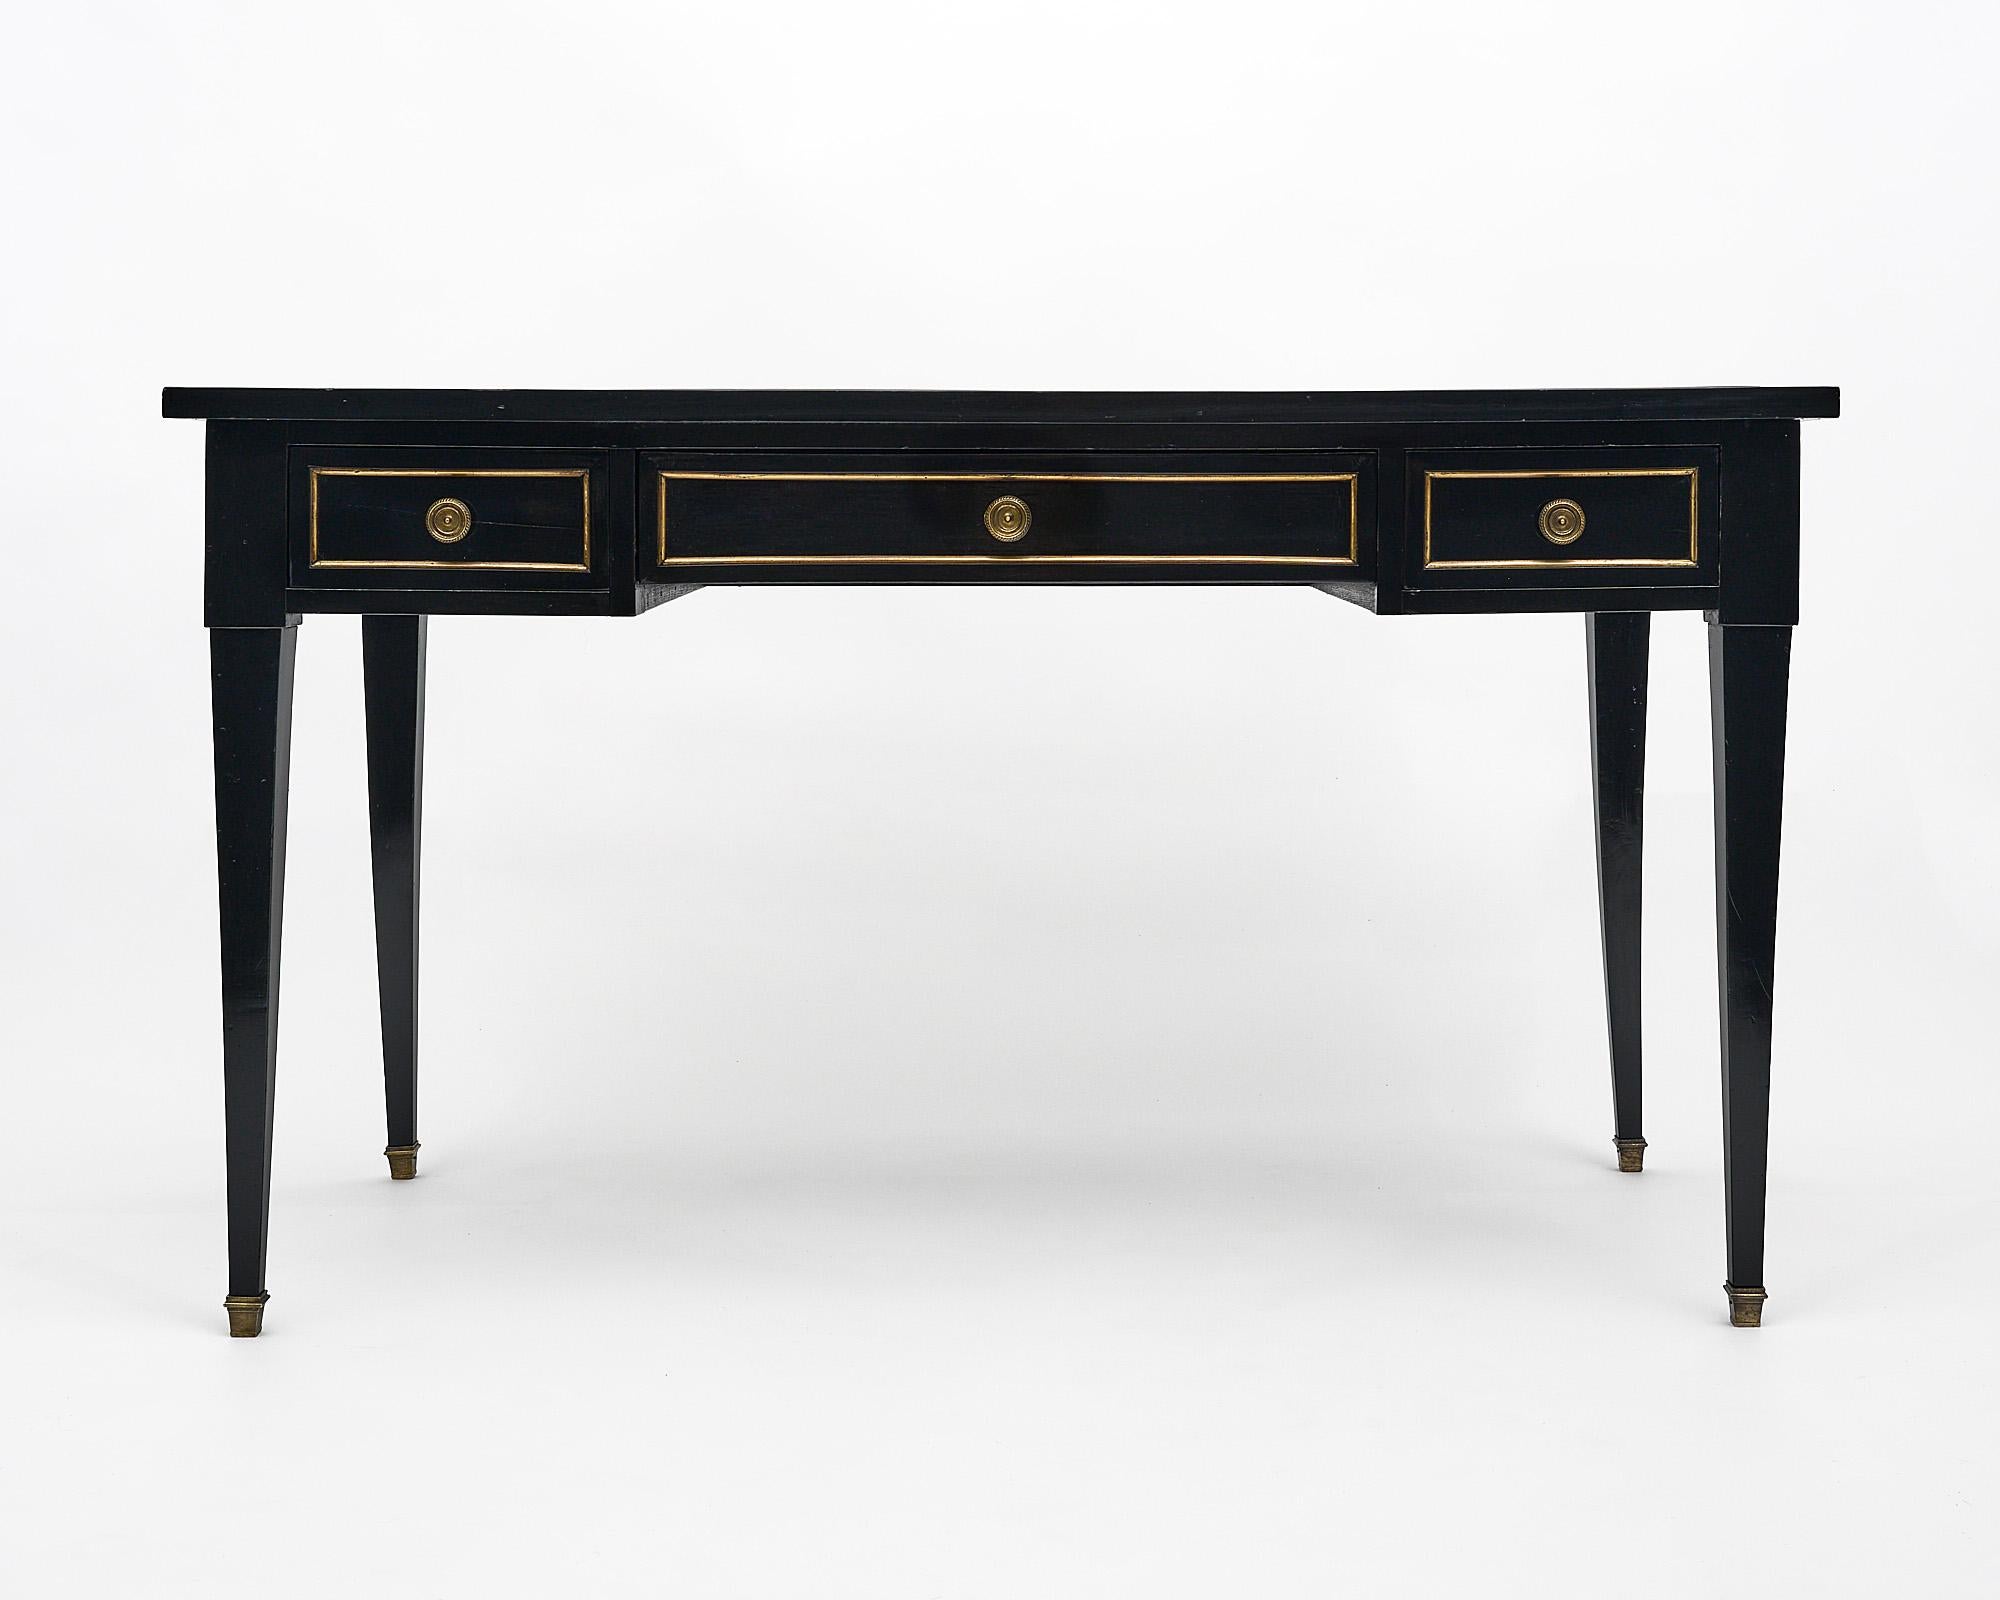 Desk, French, in the Louis XVI style made of mahogany that has been ebonized and finished in a museum quality French polish. This elegant writing desk features three dovetailed drawers, square tapered legs, and gilt brass throughout. This table